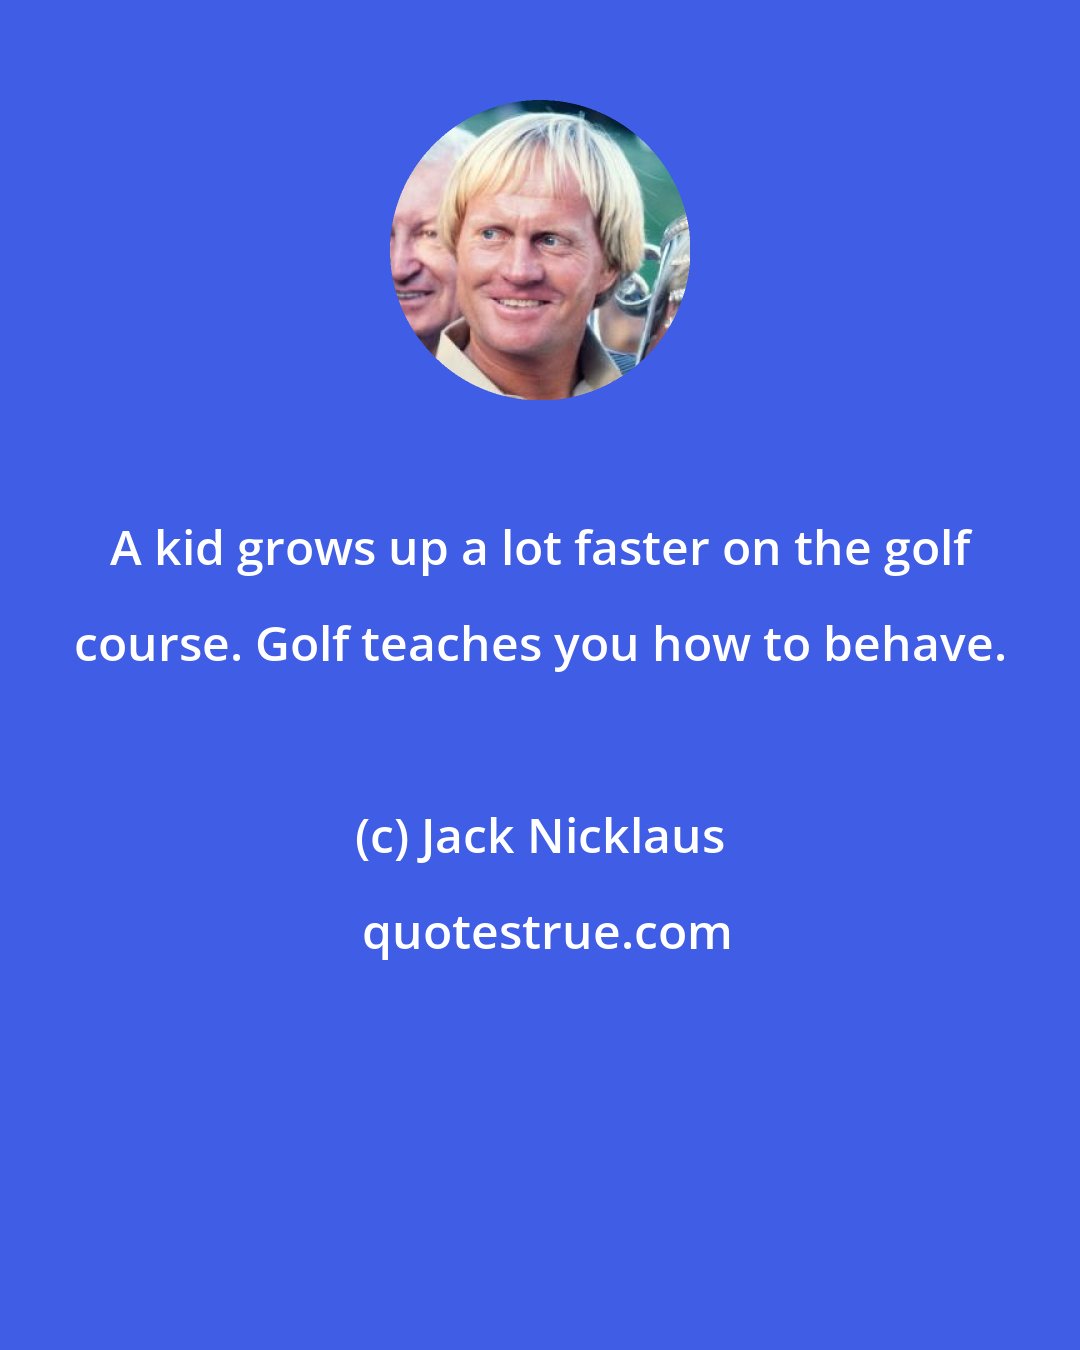 Jack Nicklaus: A kid grows up a lot faster on the golf course. Golf teaches you how to behave.